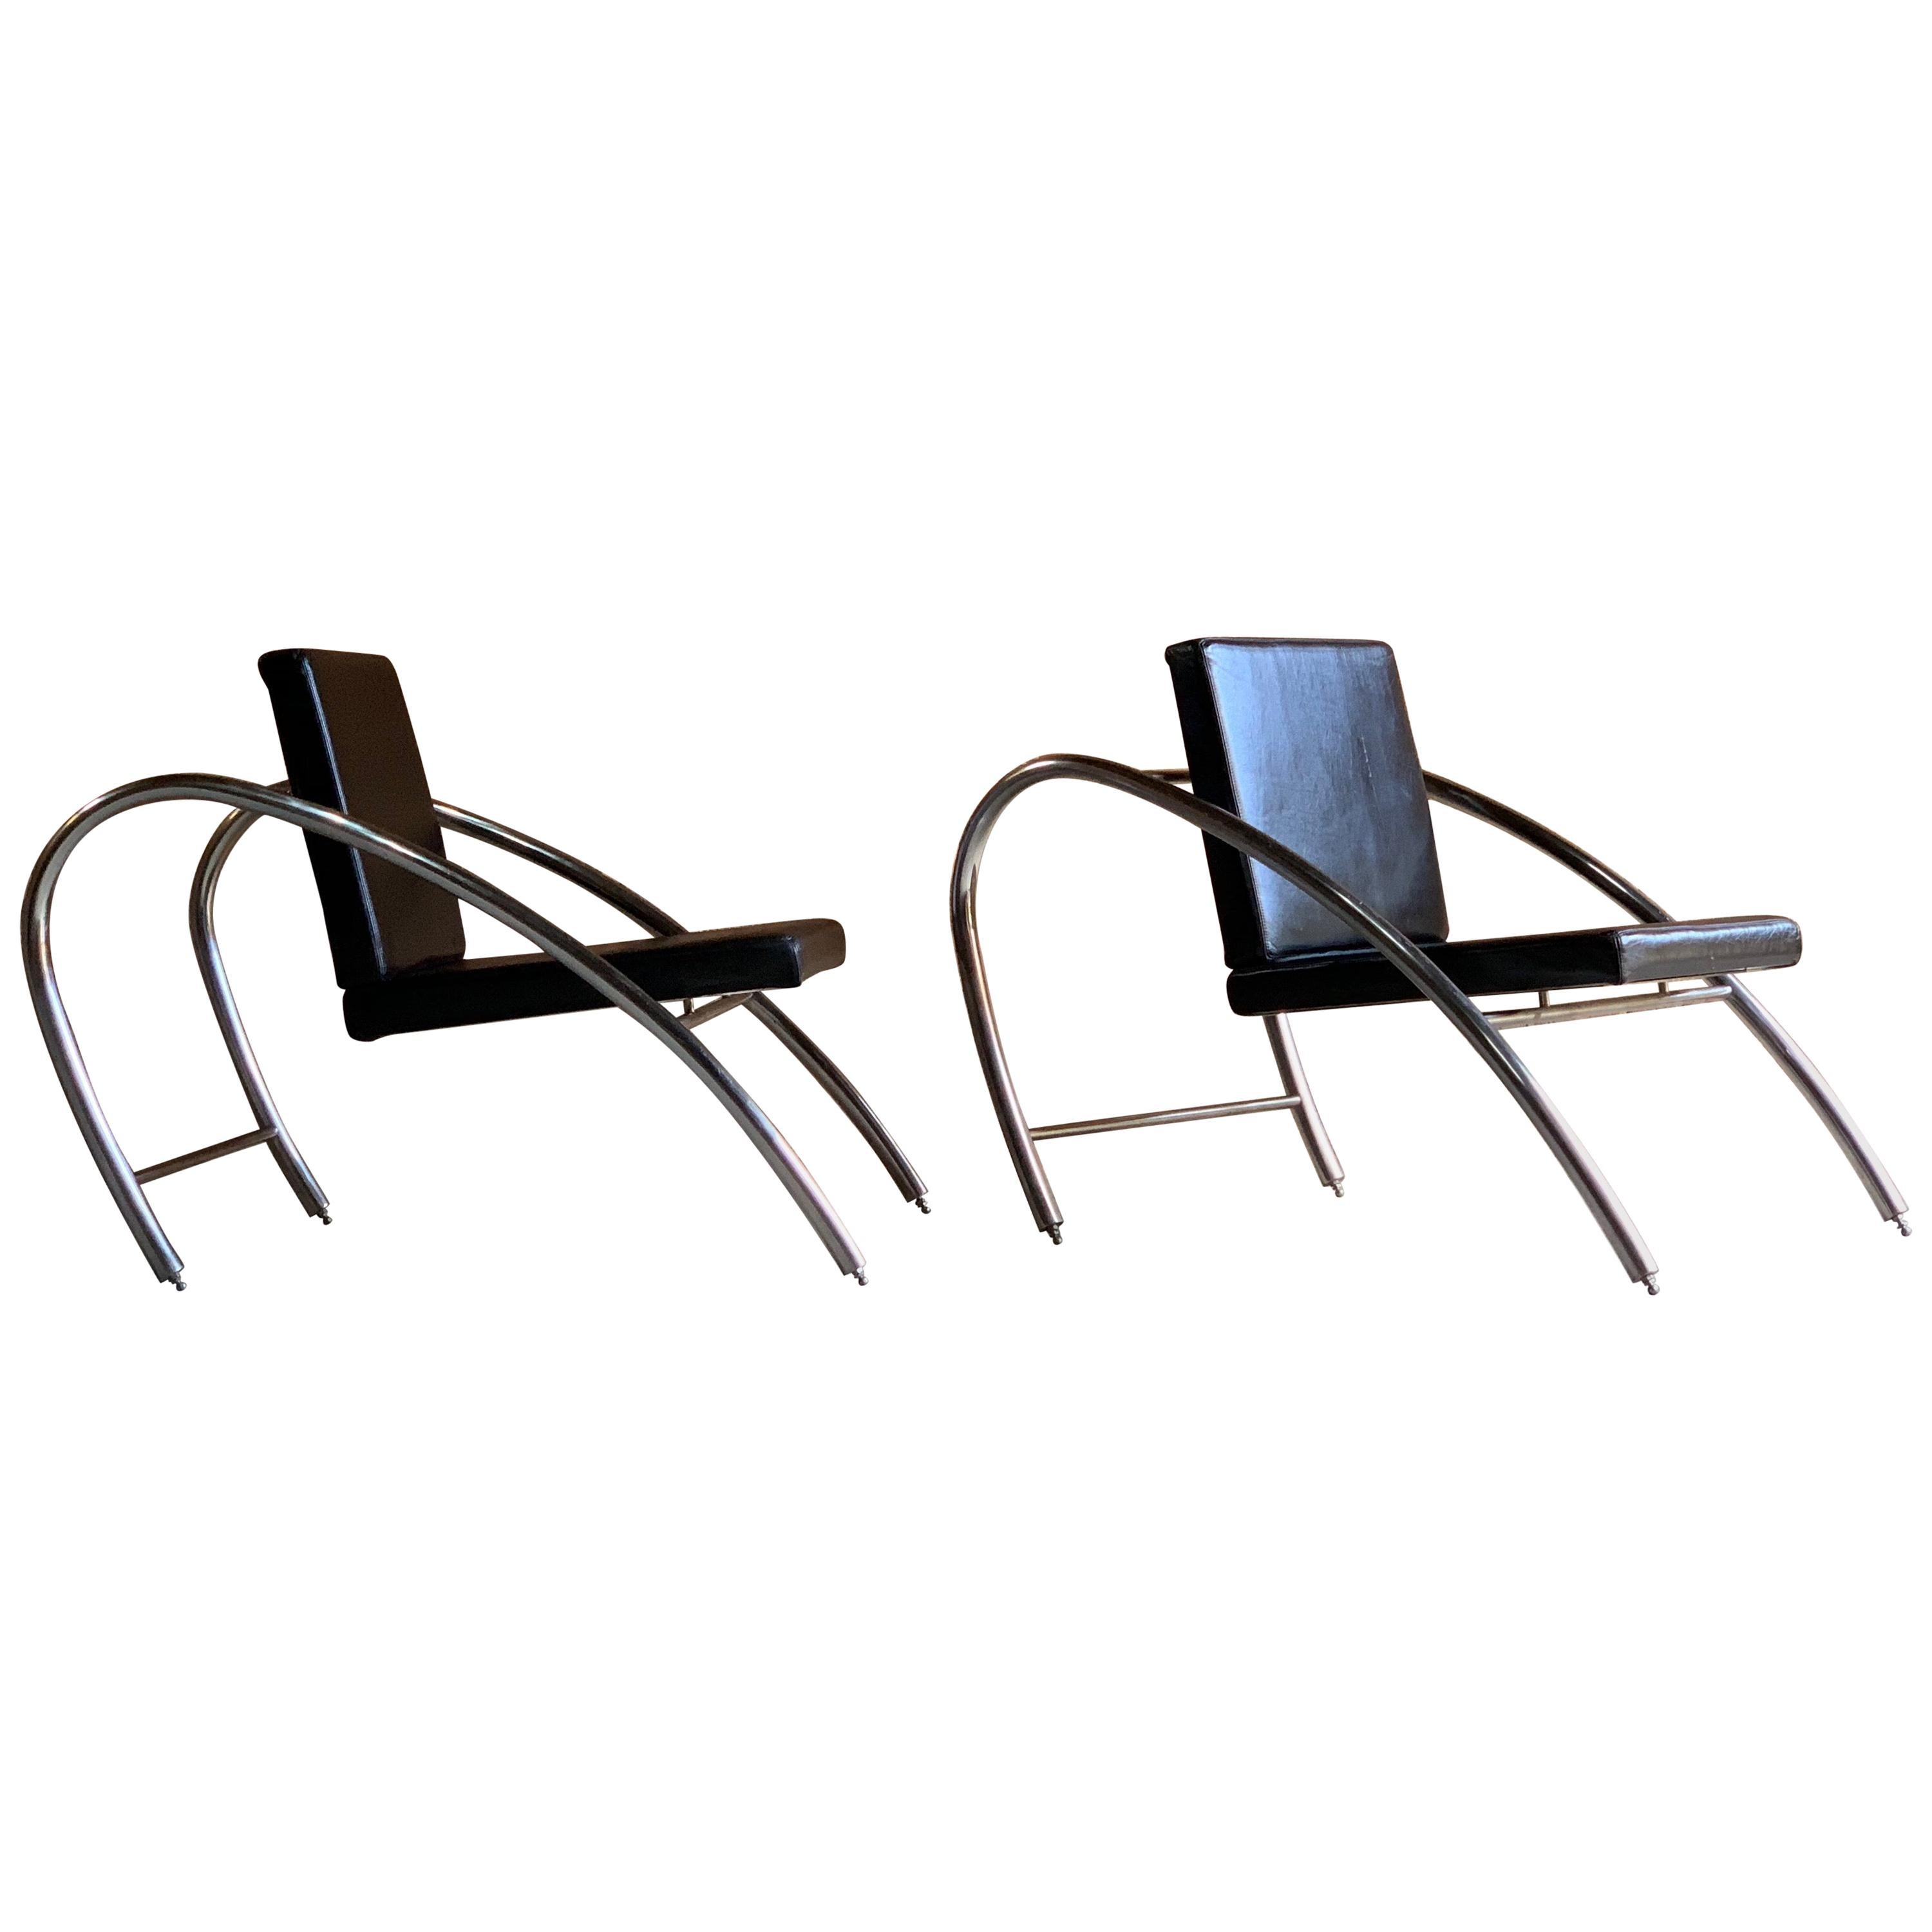 Mid-Century Modern Moreno Chrome & Leather Lounge Chairs by Francois Scali & Alain Domingo for Nemo